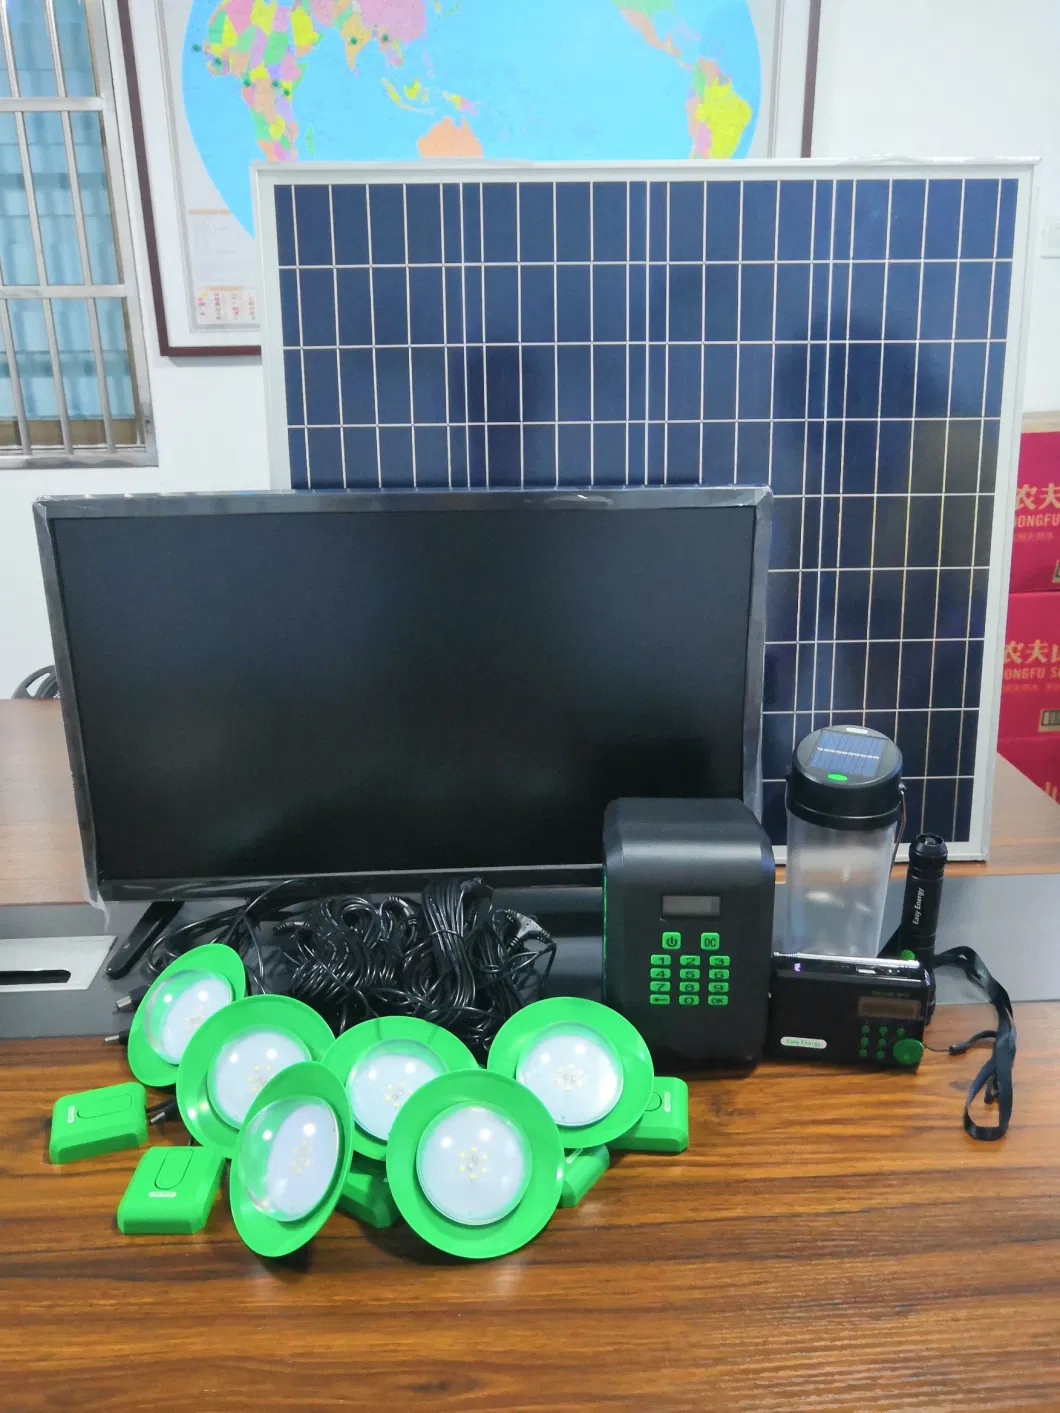 Pay as You Go Solar Power Home Kits Lighting System